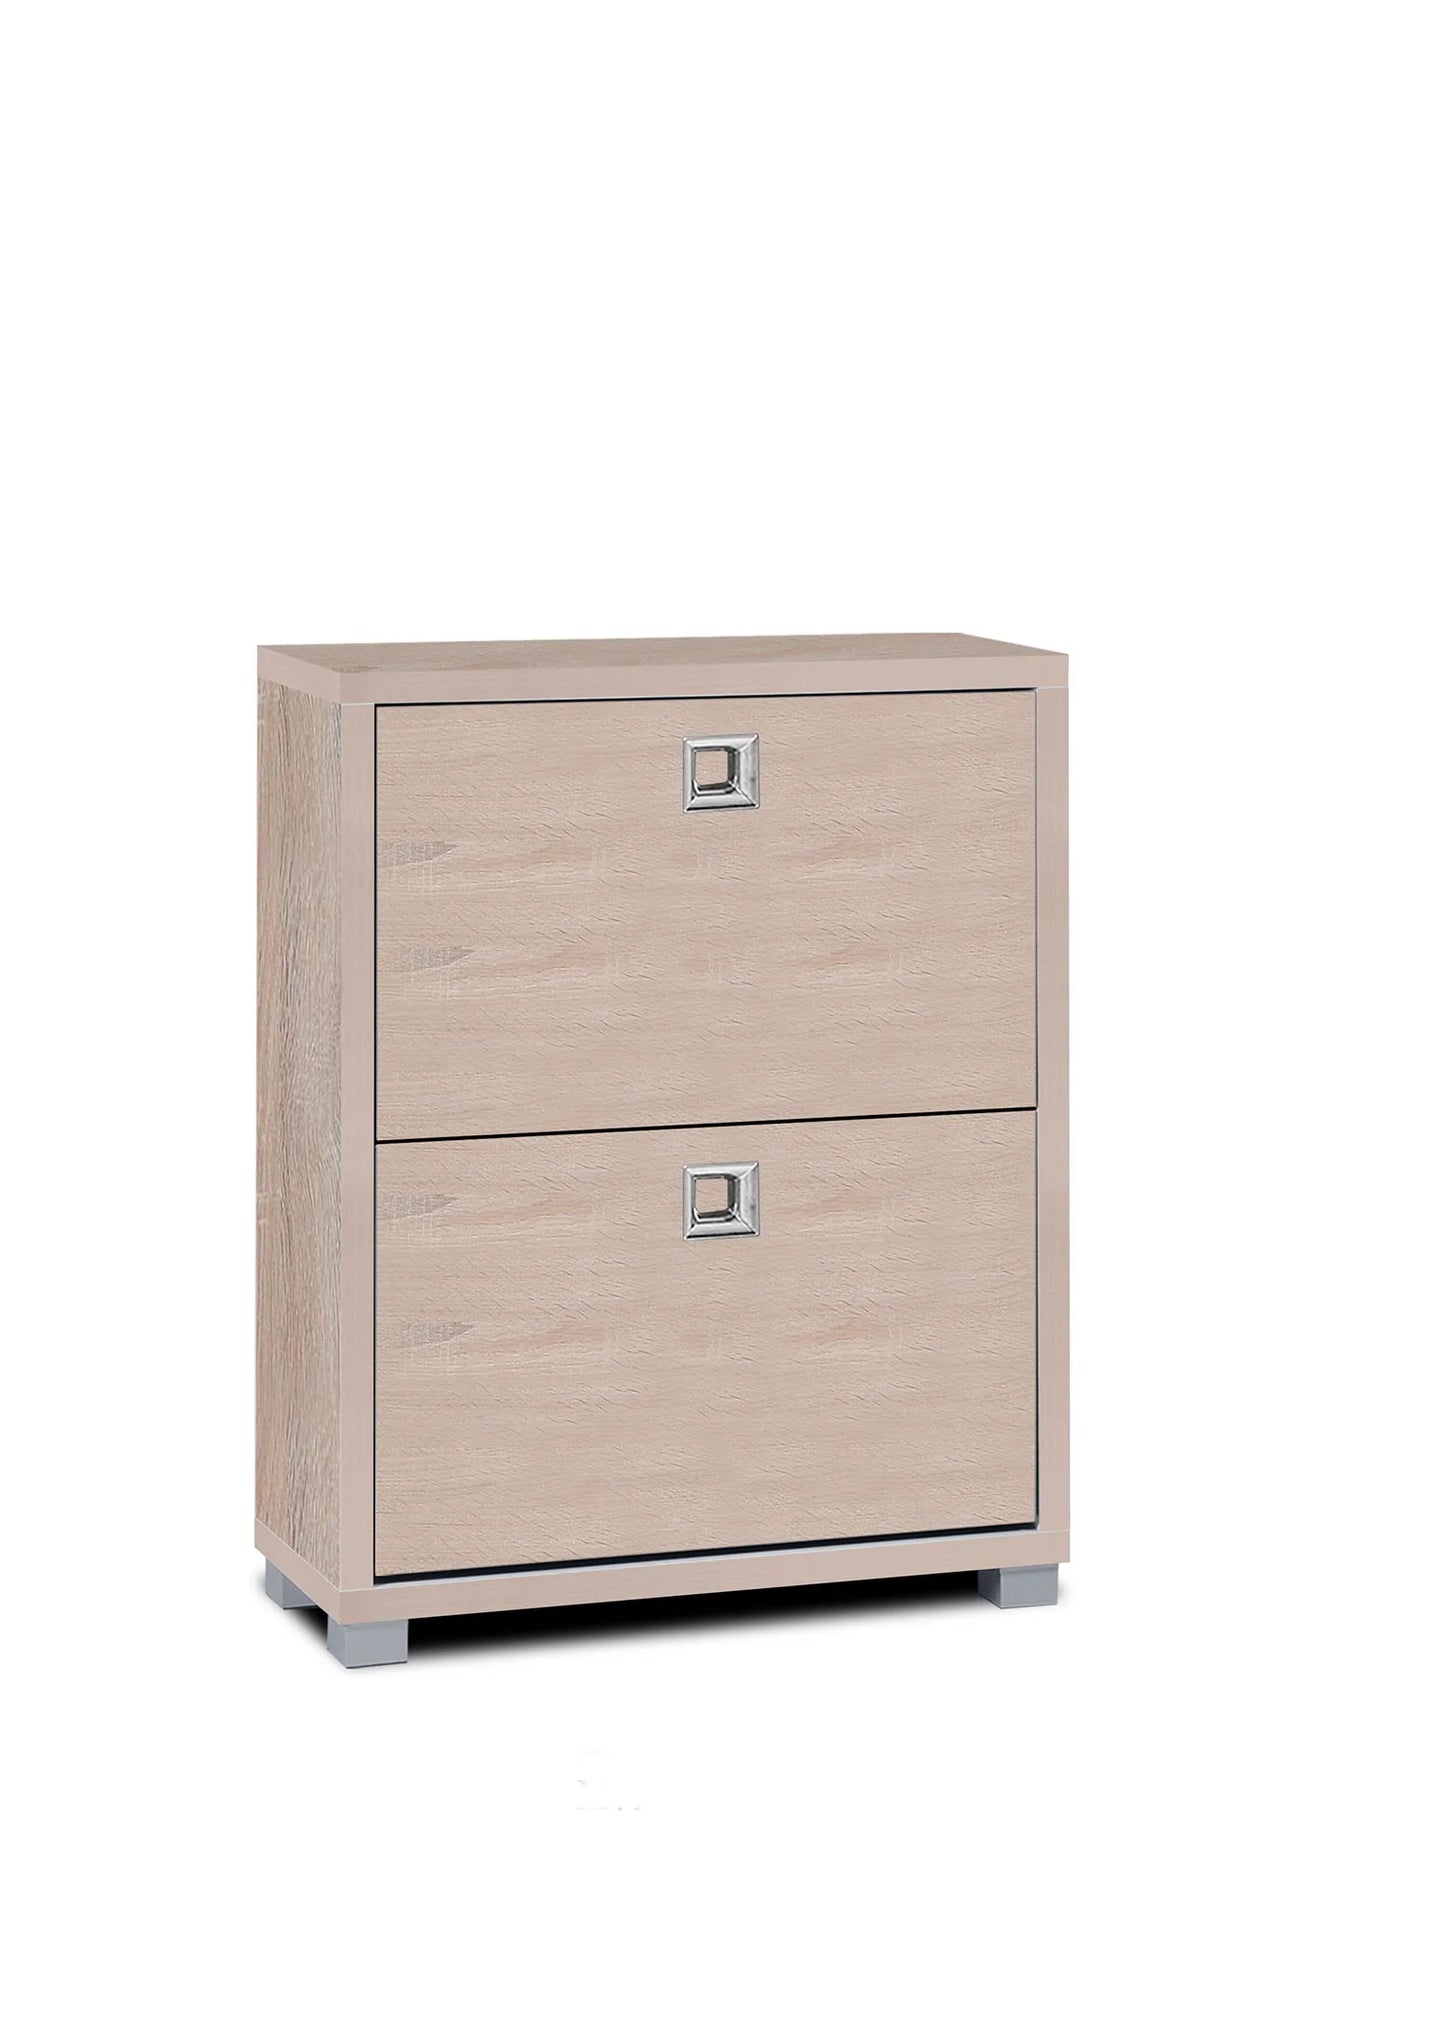 Shoe Cabinet 2 Drawers Comes in Espresso or Natural Finish